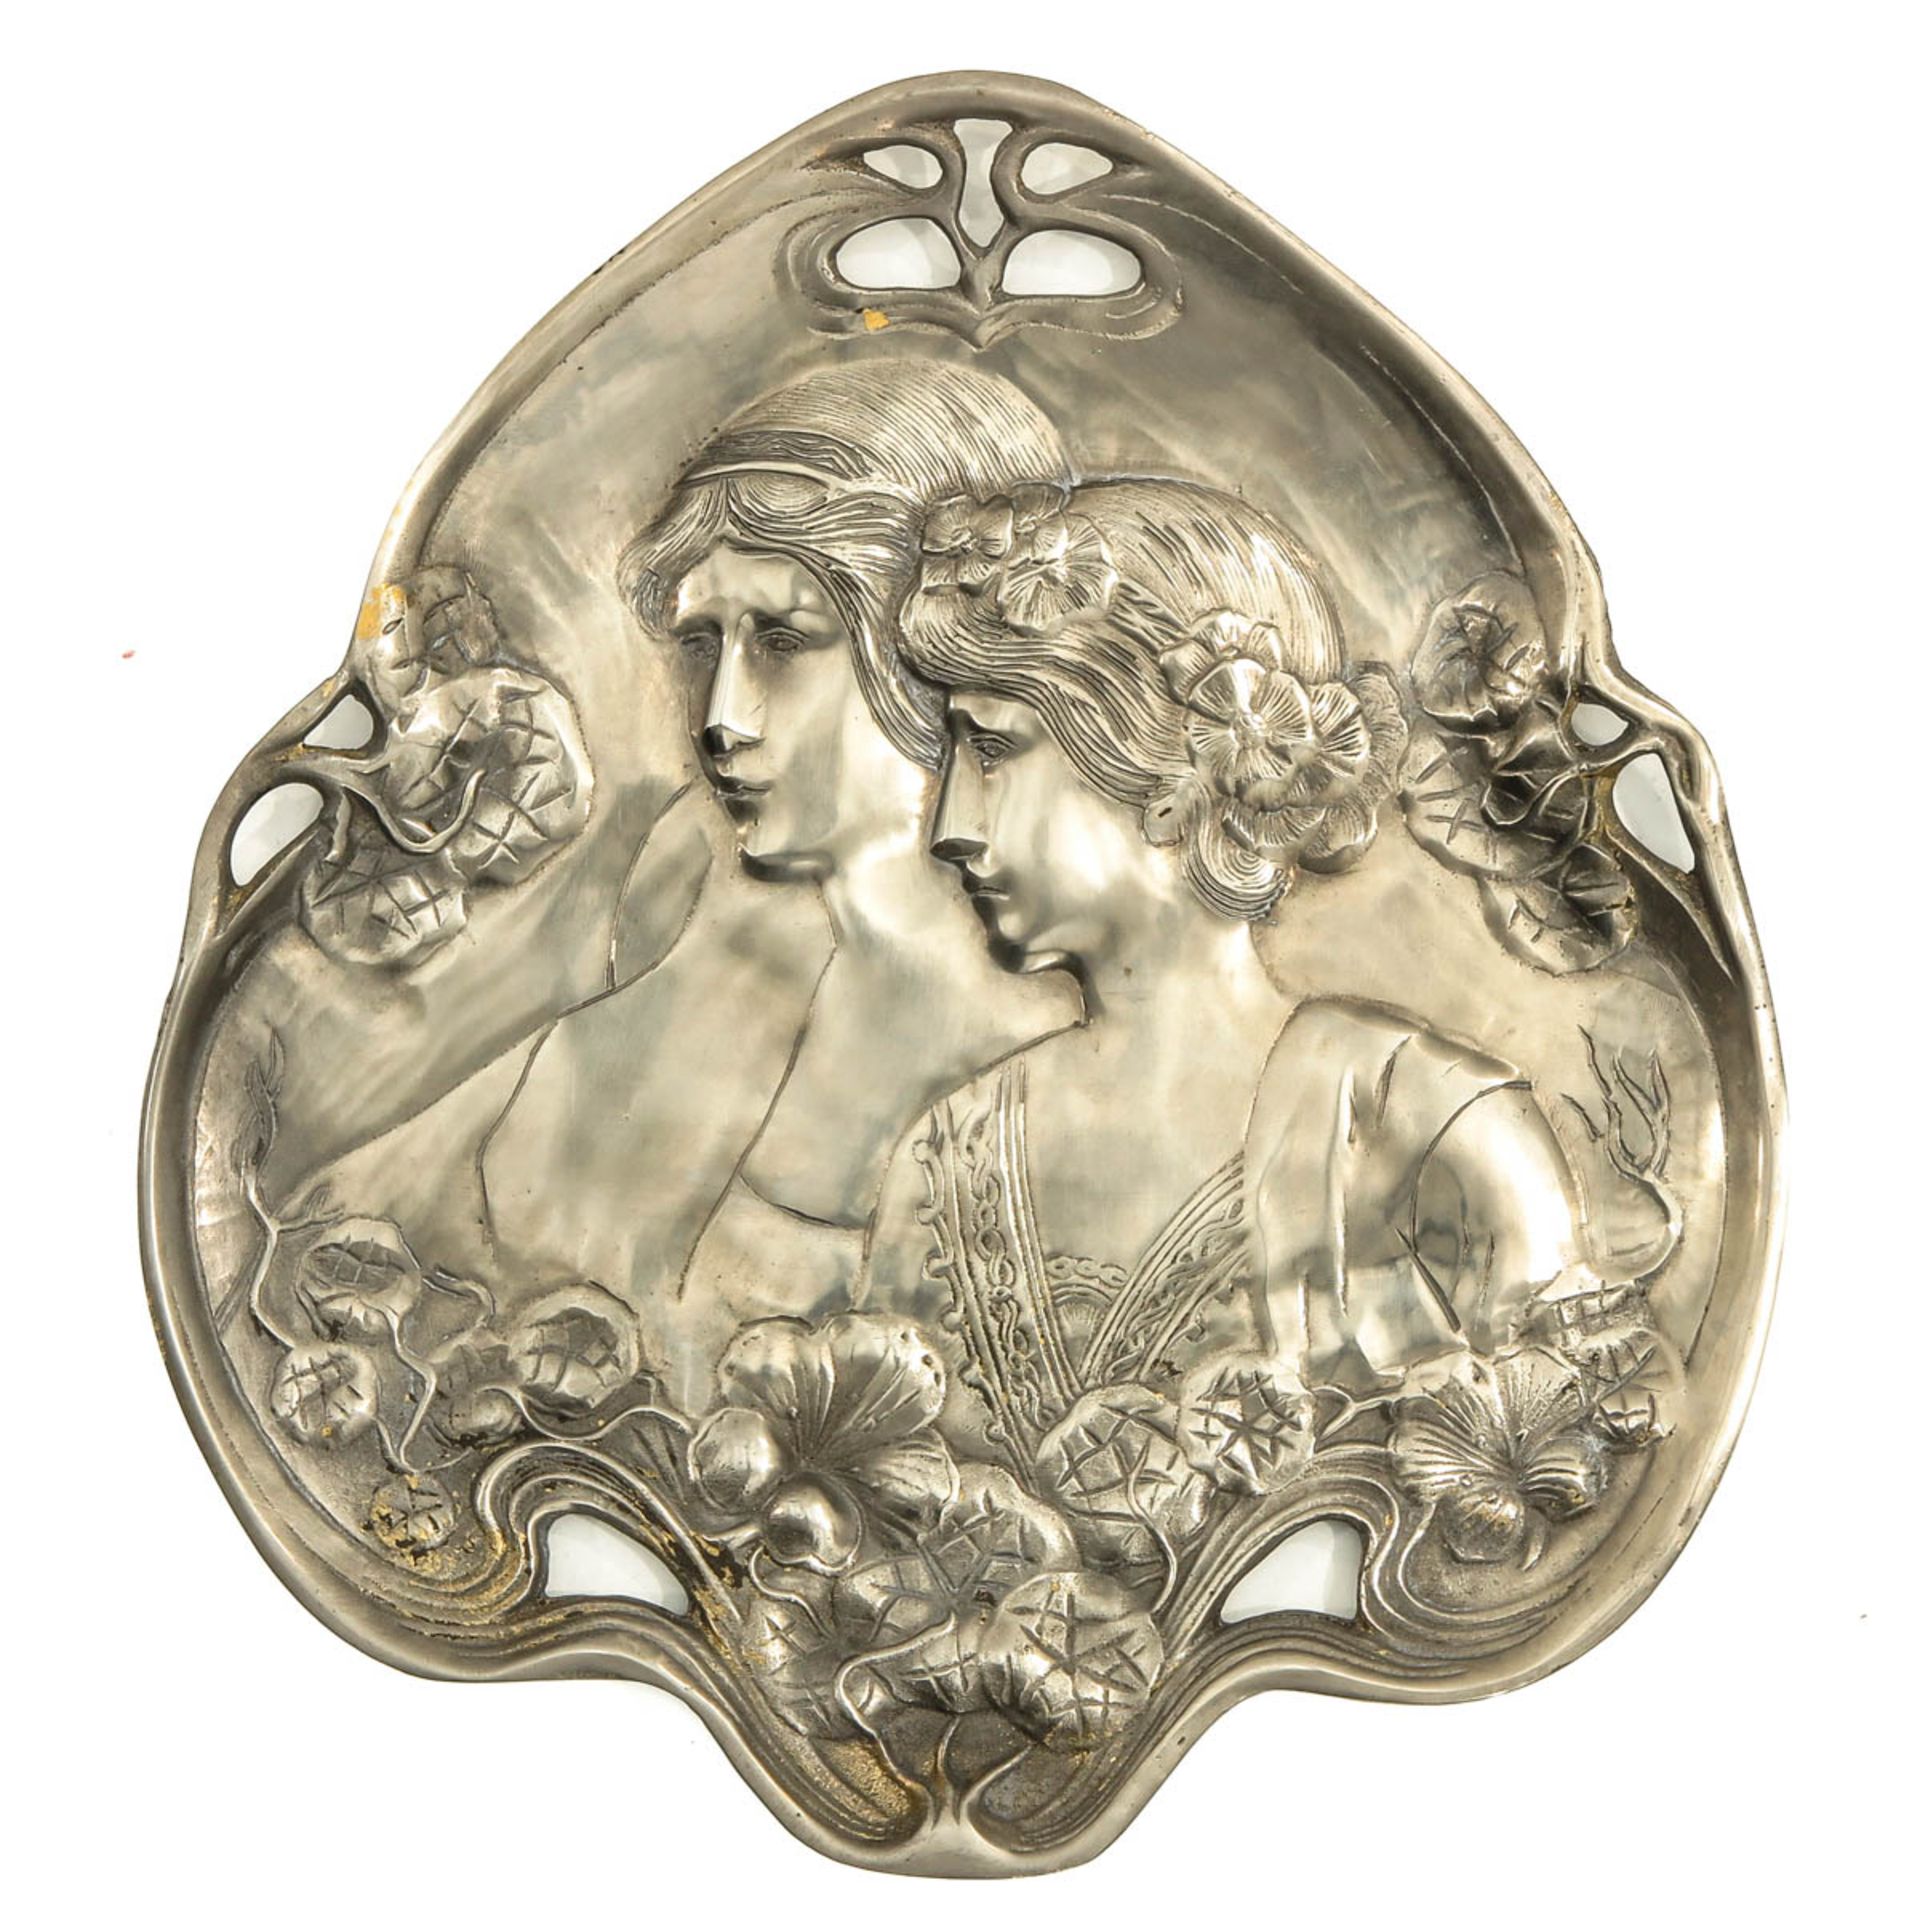 A Collection of 5 Art Nouveau Serving Dishes - Image 9 of 10